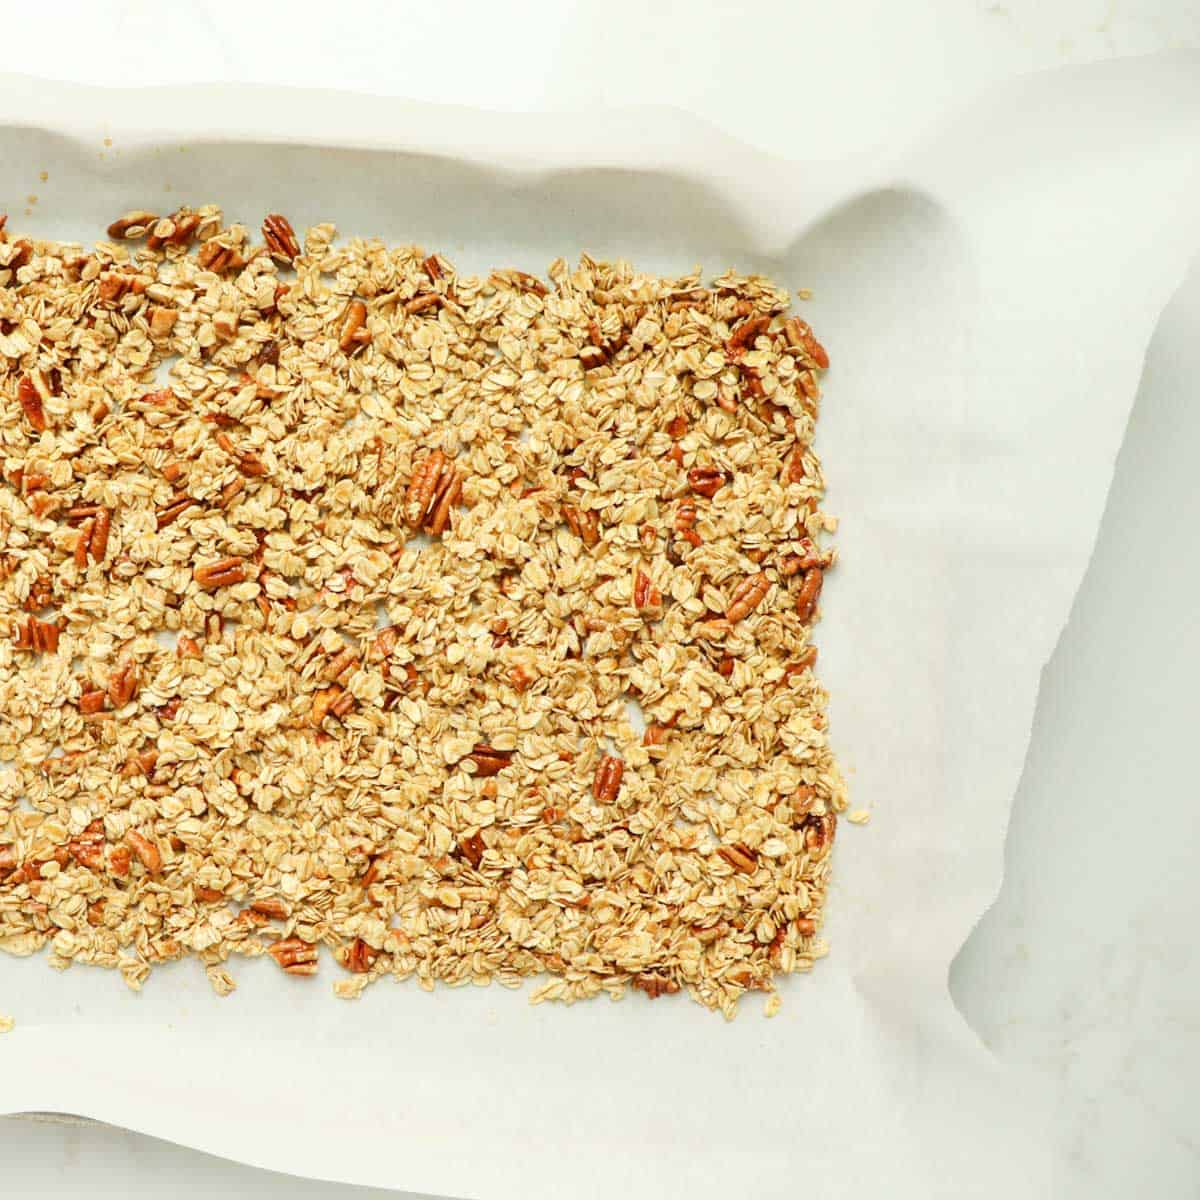 Unbaked granola on a baking pan lined with parchment paper.